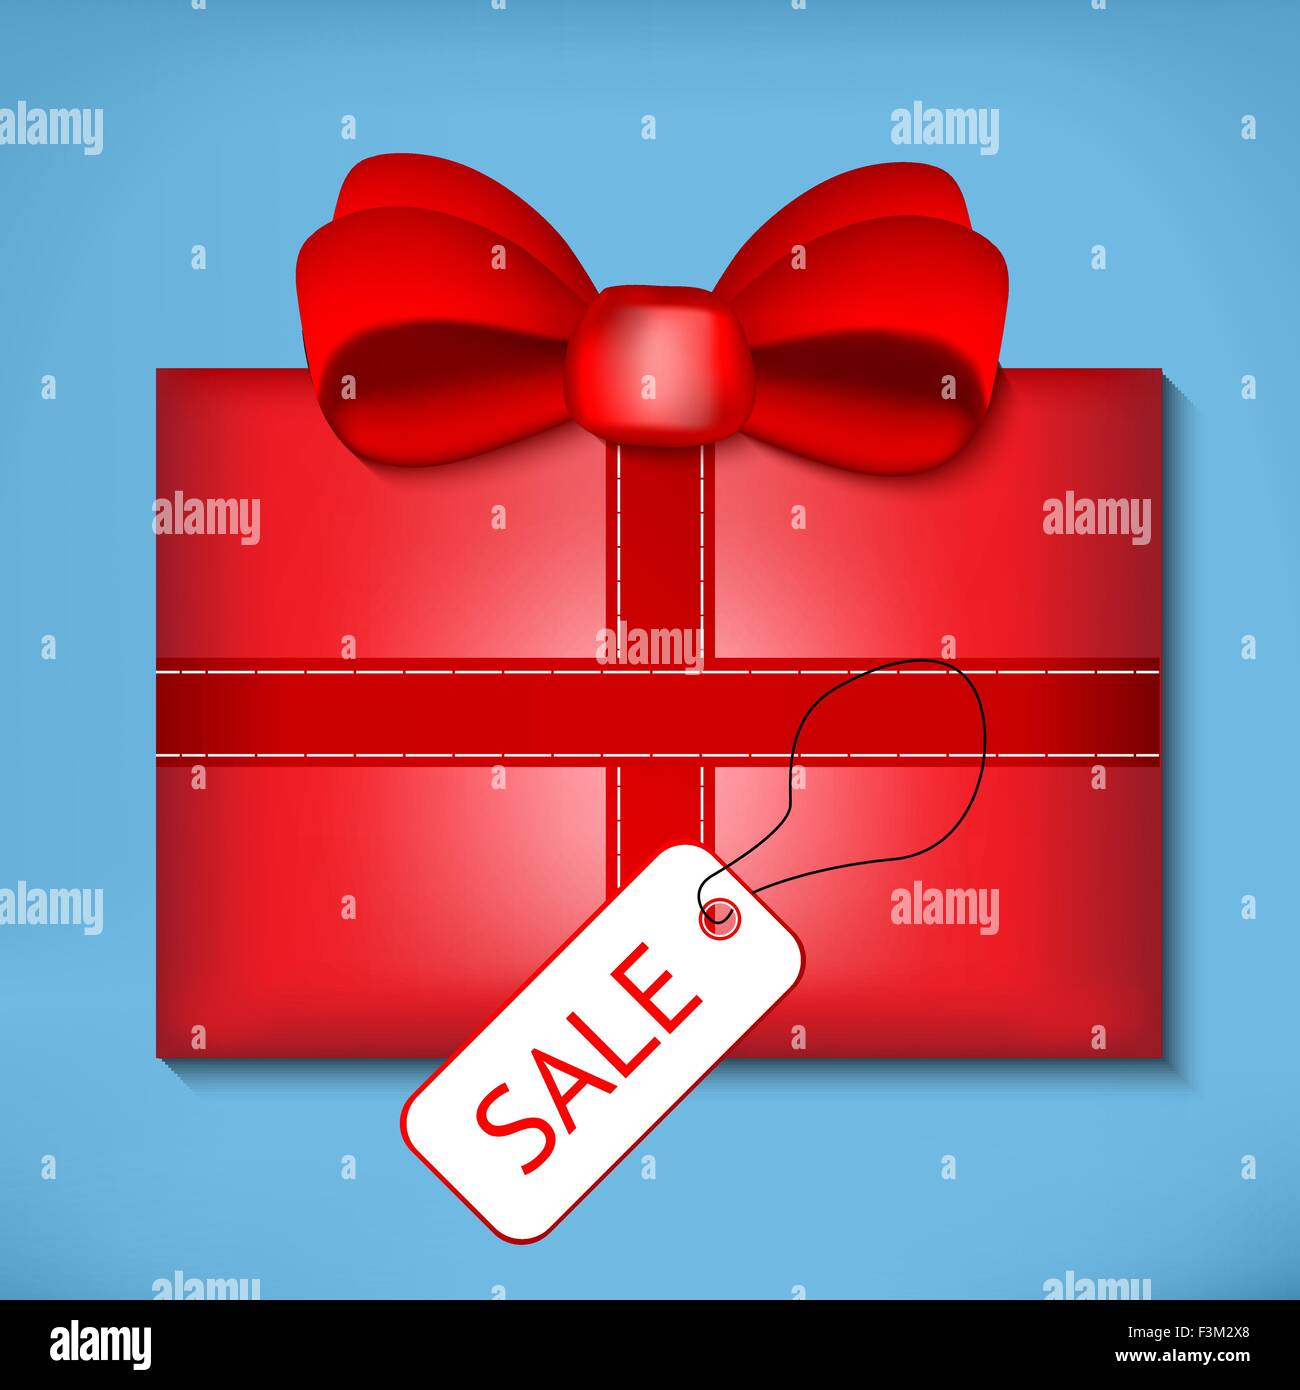 Valentines gifts box Stock Vector Images - Alamy